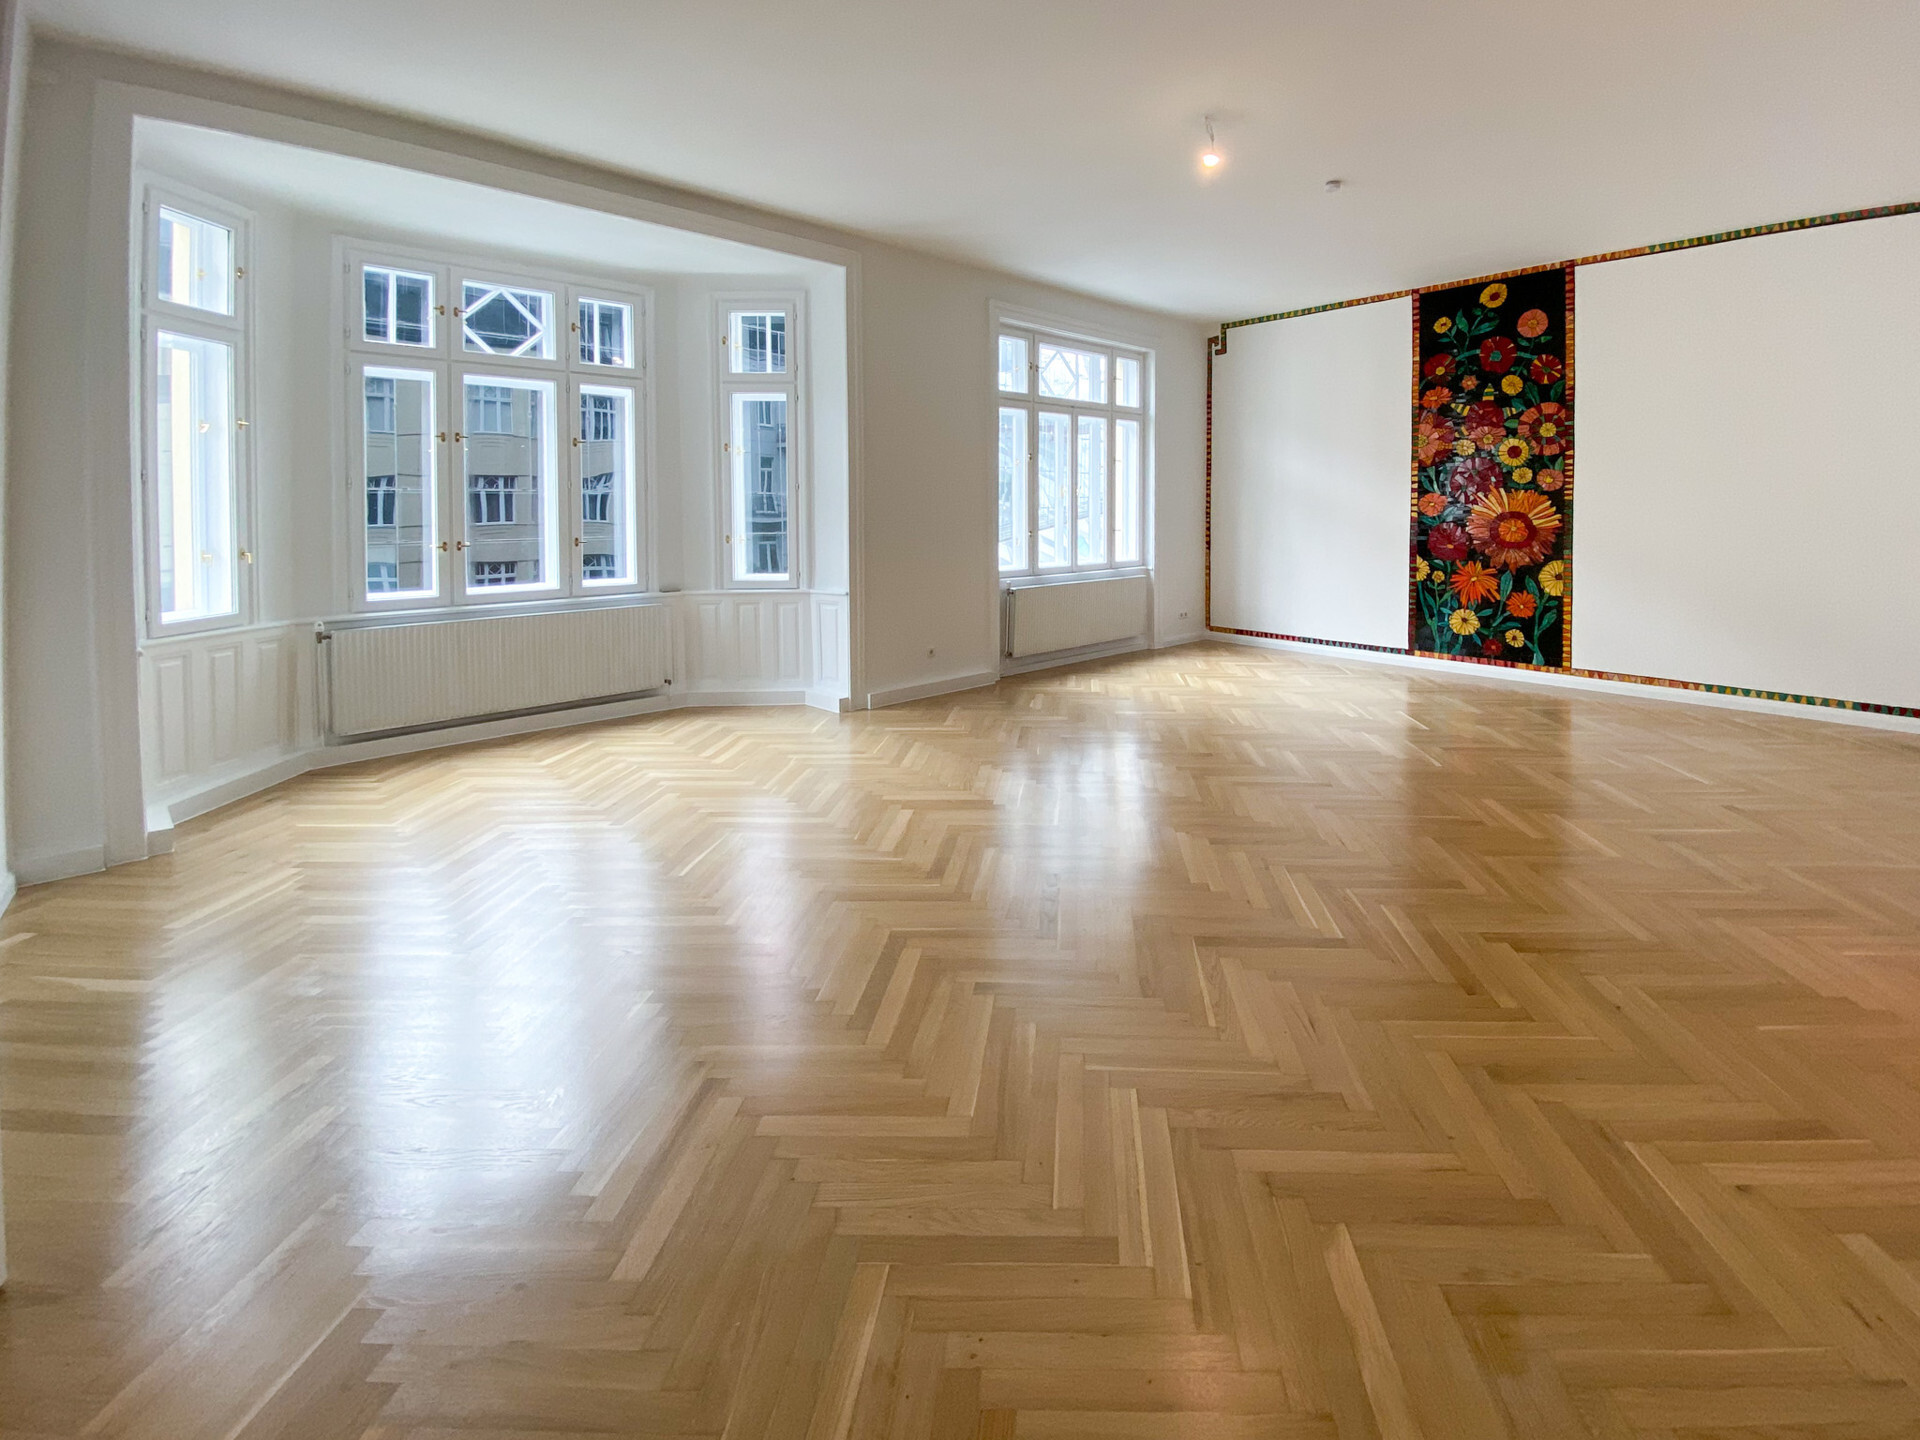 Close to the city center: 3-room apartment in an old building - for rent for an indefinite period in 1020 Vienna